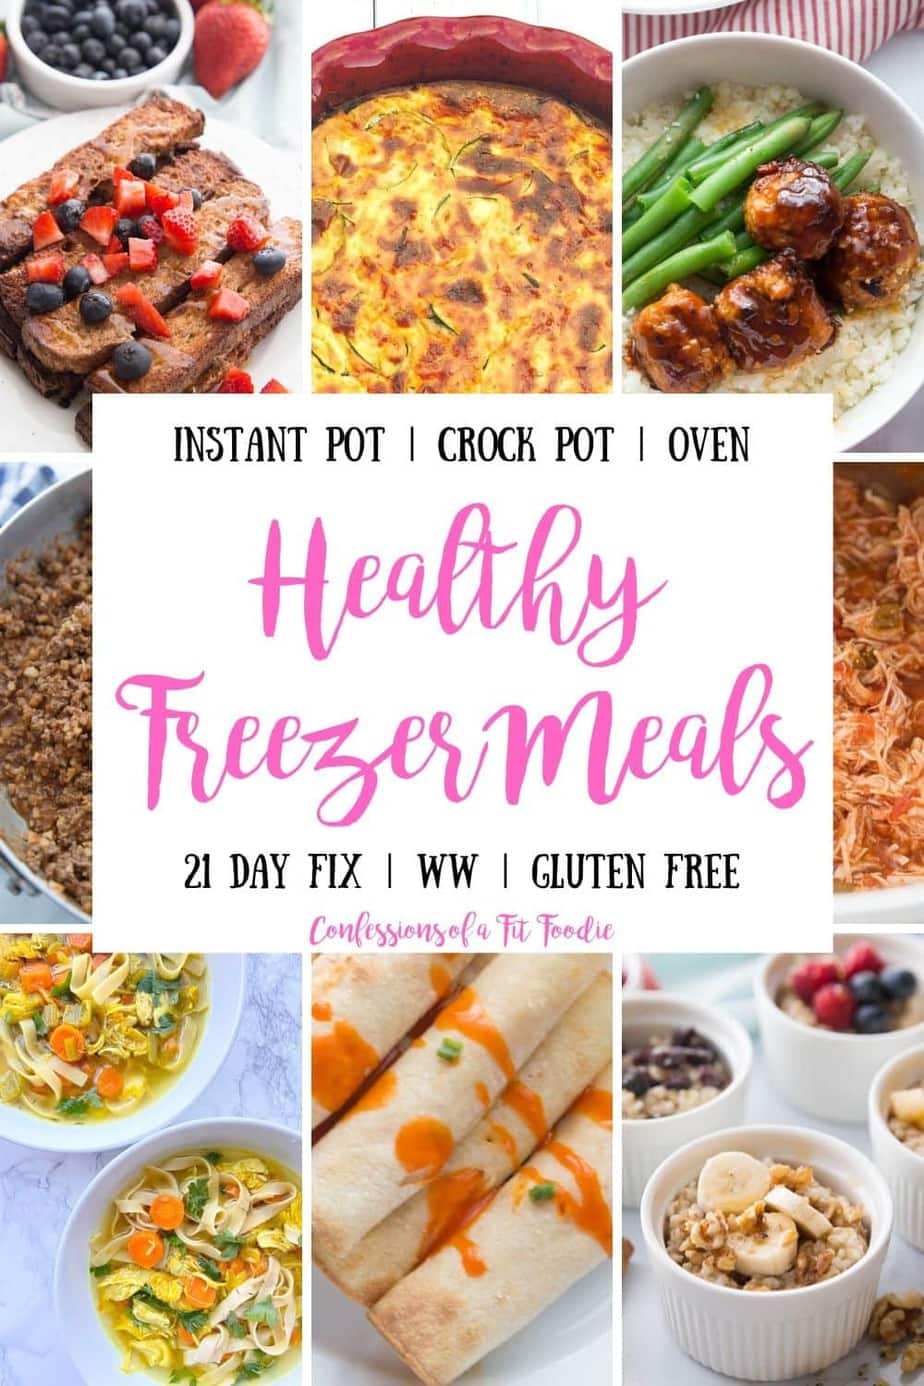 22 Healthy Freezer Meals (That You'll Actually Love) - Pinch of Yum